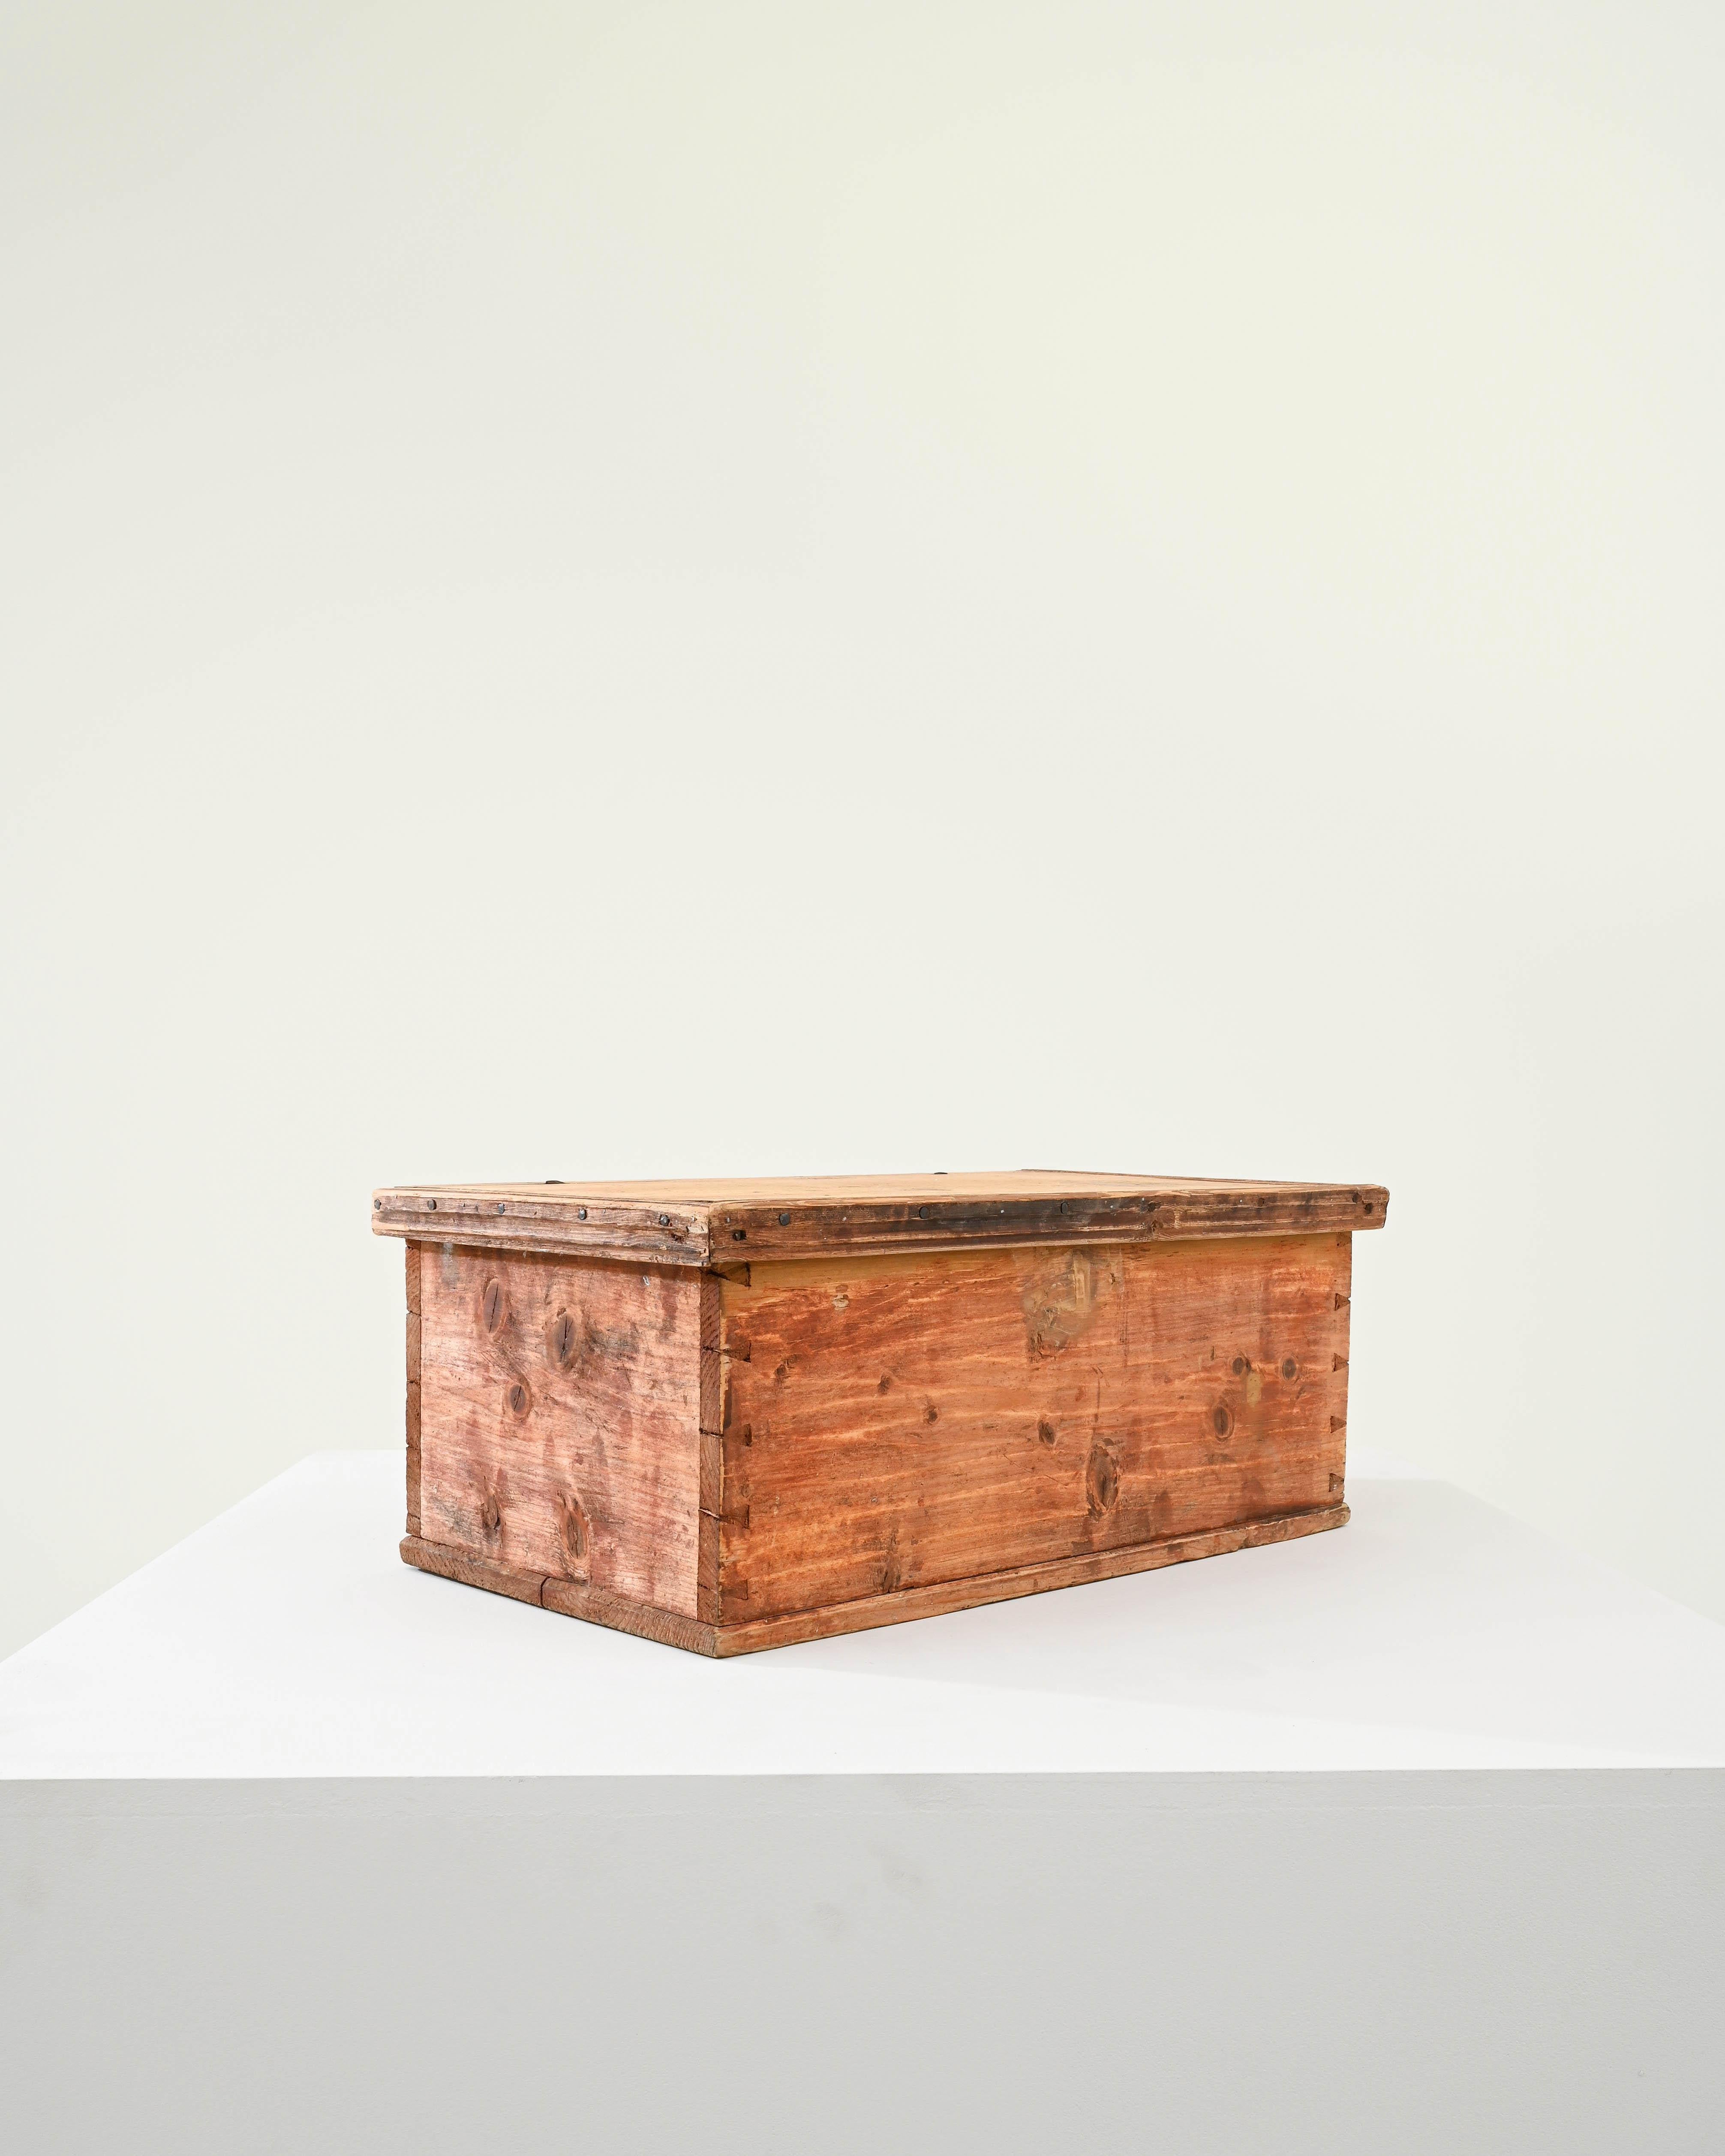 This wooden box was produced in Scandinavian, circa 1900. A patinated clack box showing signs of a timeworn existence, featuring original metal hardware. Deftly nailed and joined with chiseled dovetail joints, this ordinary pine box reveals a